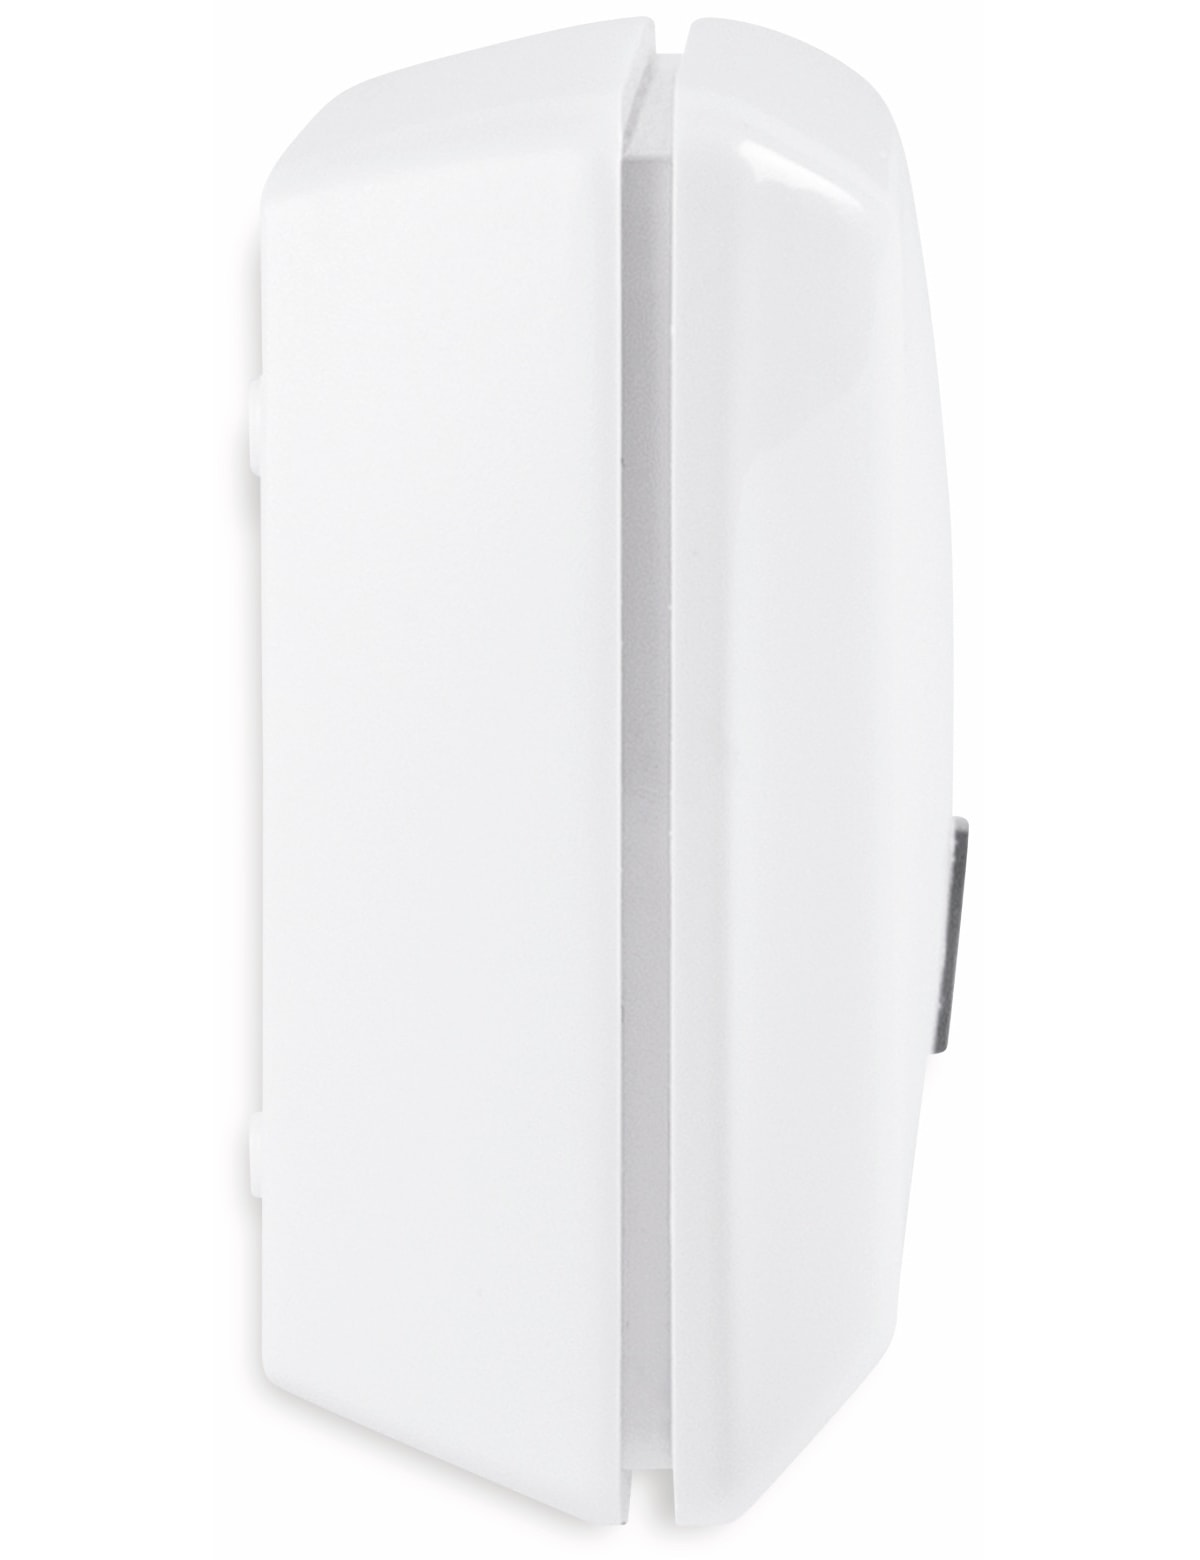 Homematic IP Smart Home 153663A0, Smart Home WLAN Access Point